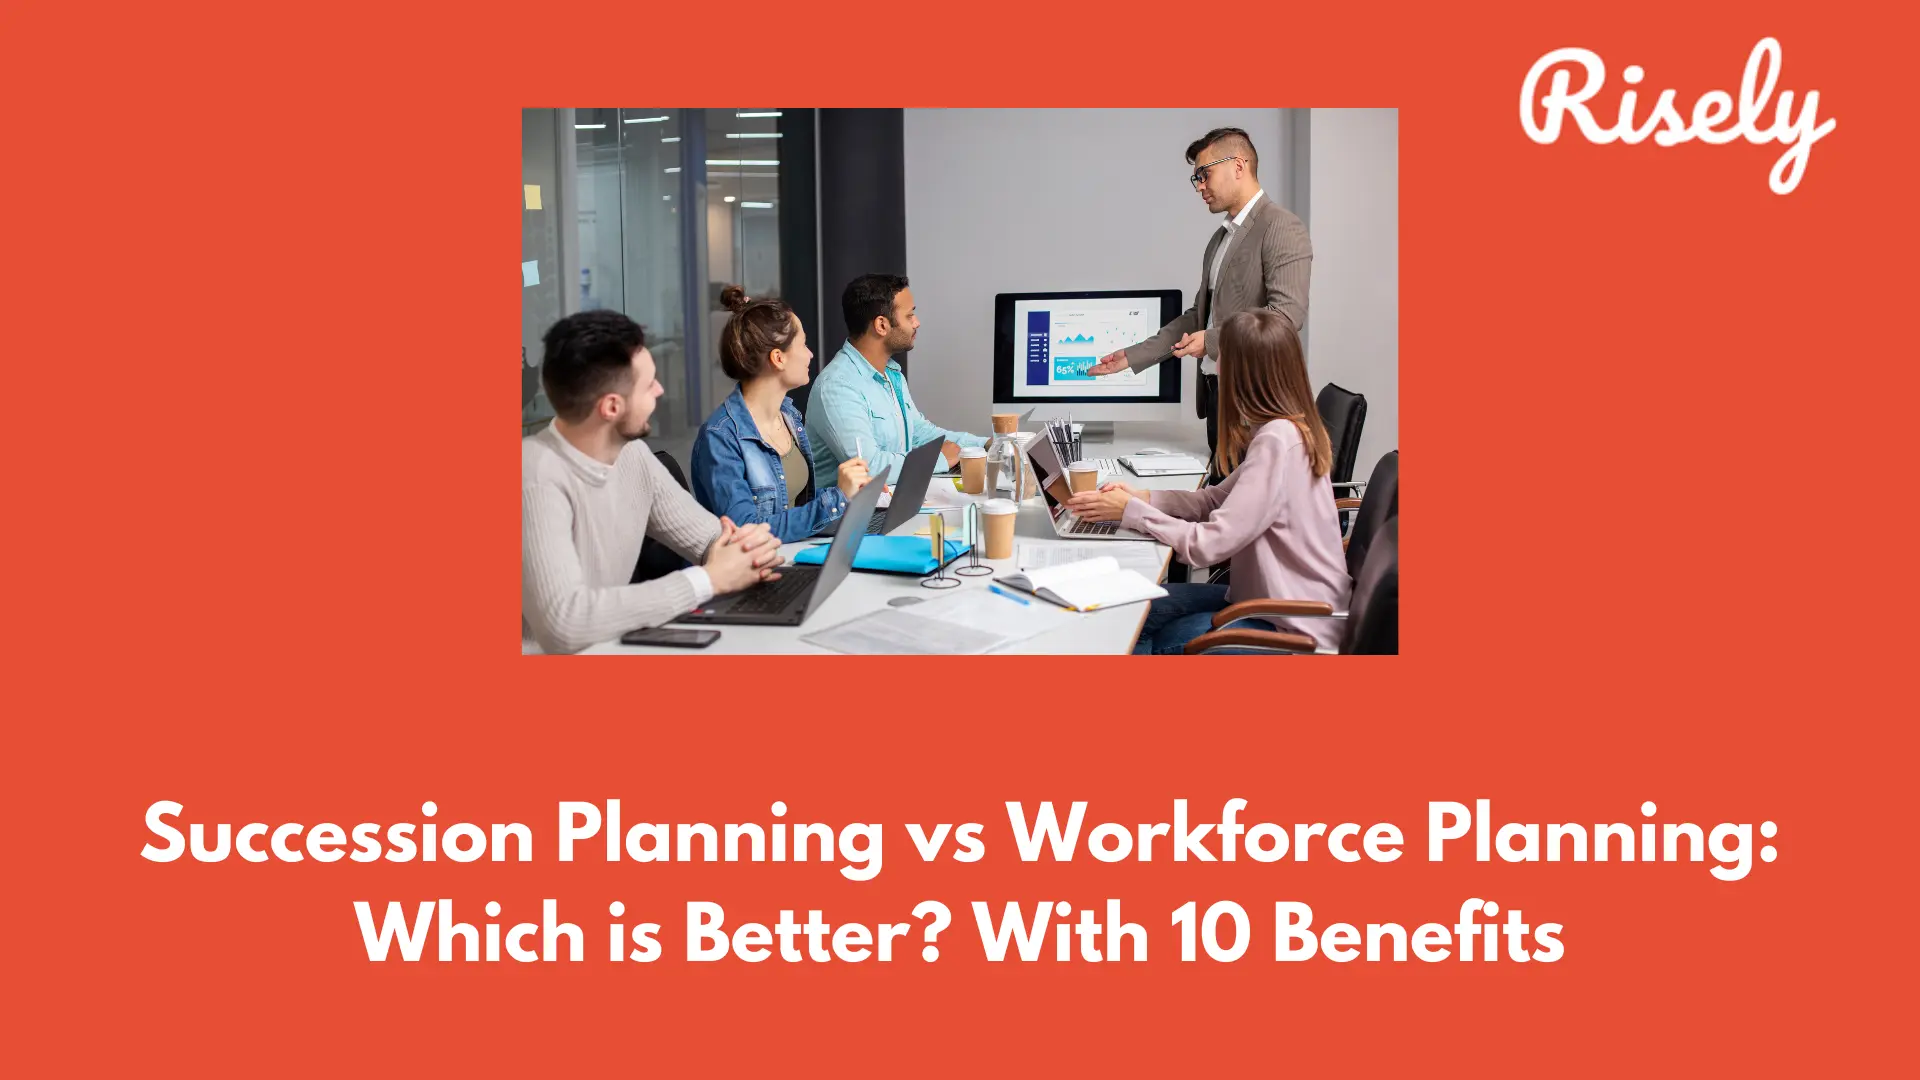 Succession Planning vs Workforce Planning: Which is Better? With 10 Benefits